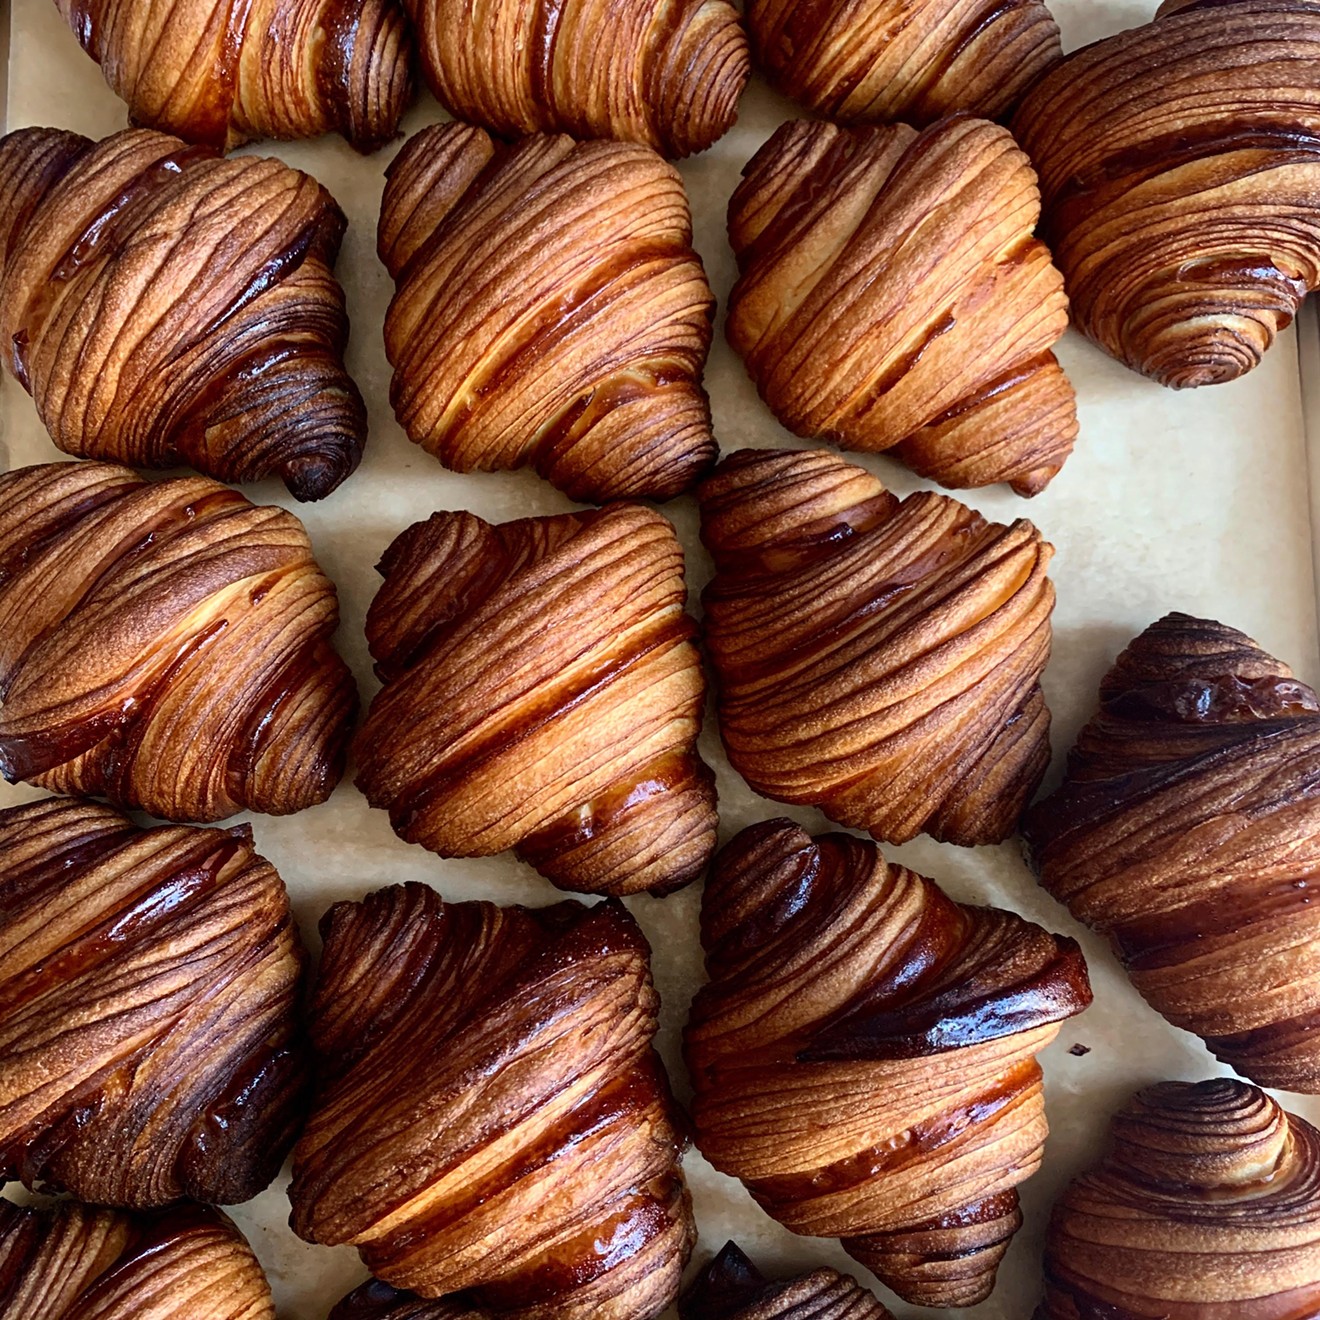 Mornings are for croissants at Bakery Four.